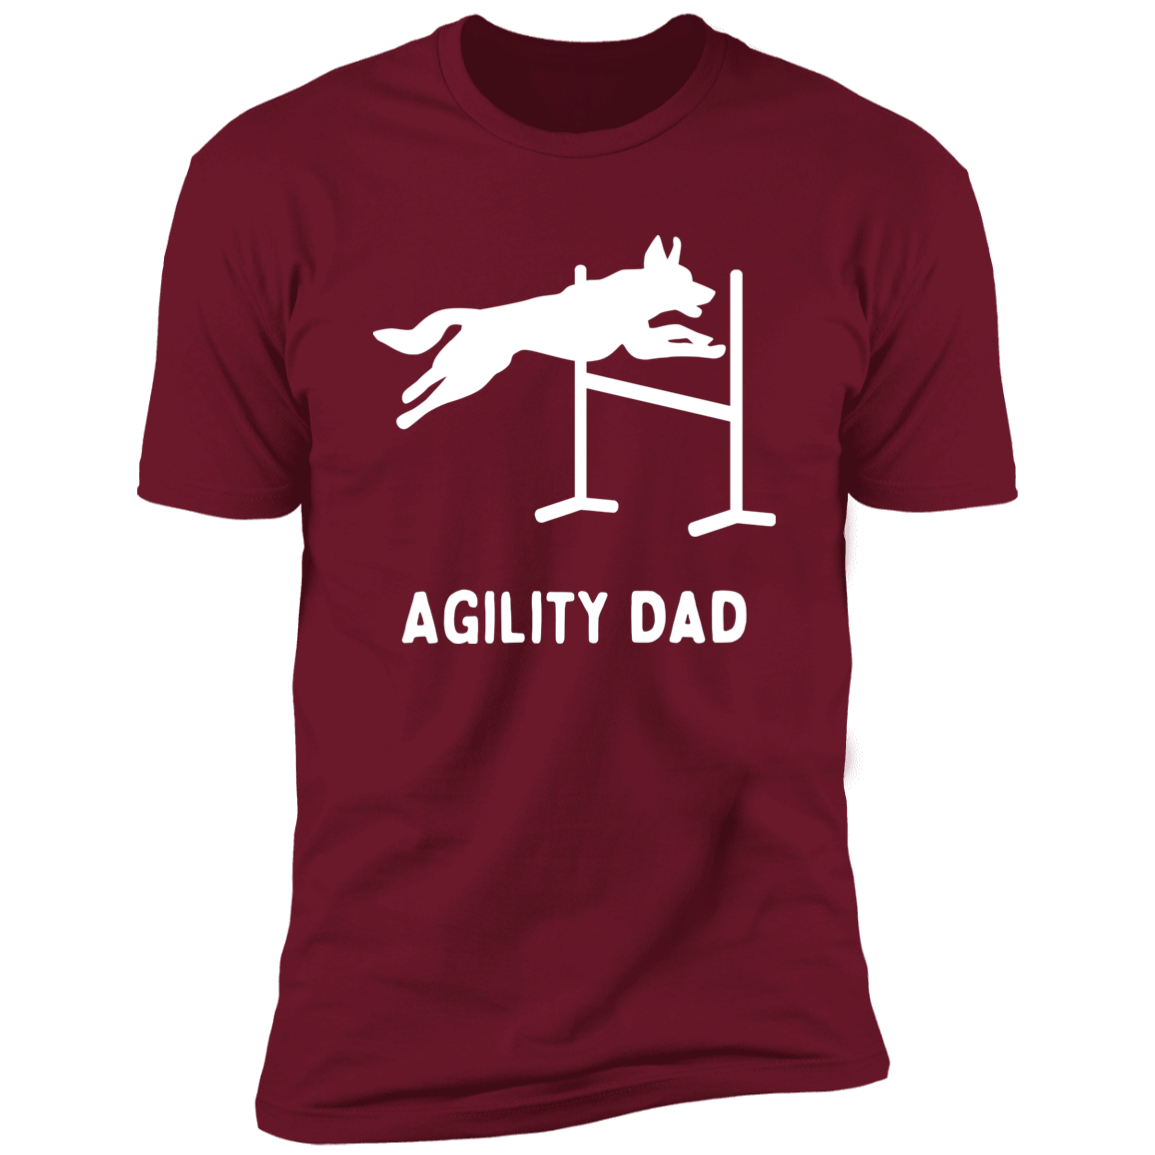 Agility Dad Agility Dog Dog T-Shirt for humans, in cardinal red